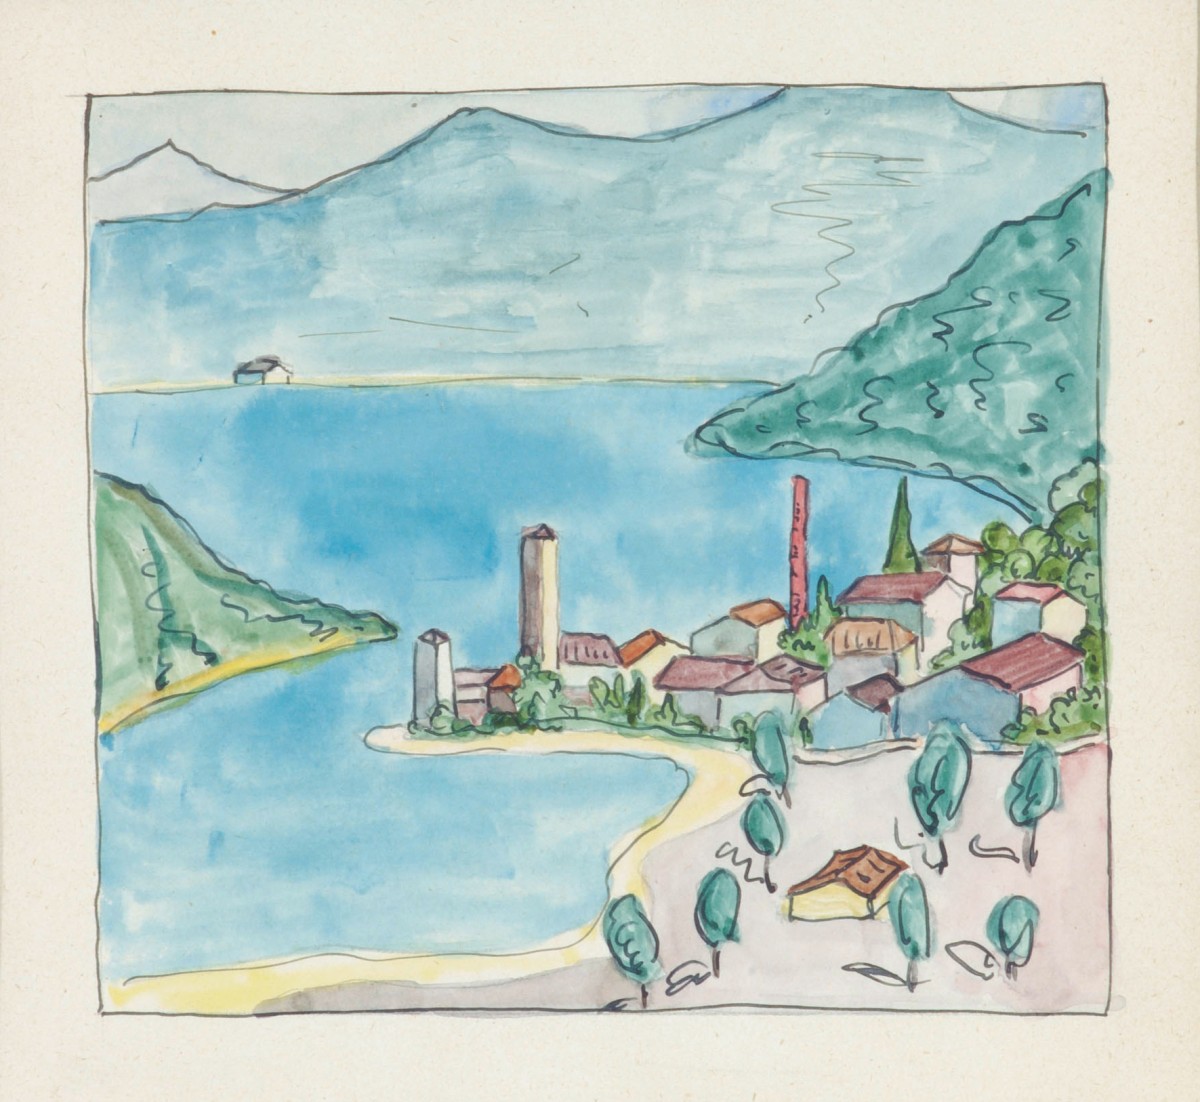 Hermann Hesse, View on Lavena at Lake Lugano, ca. 1925, Watercolor and ink, 25,8 x 17,7 cm, Sammlung Würth, Inv. 8173